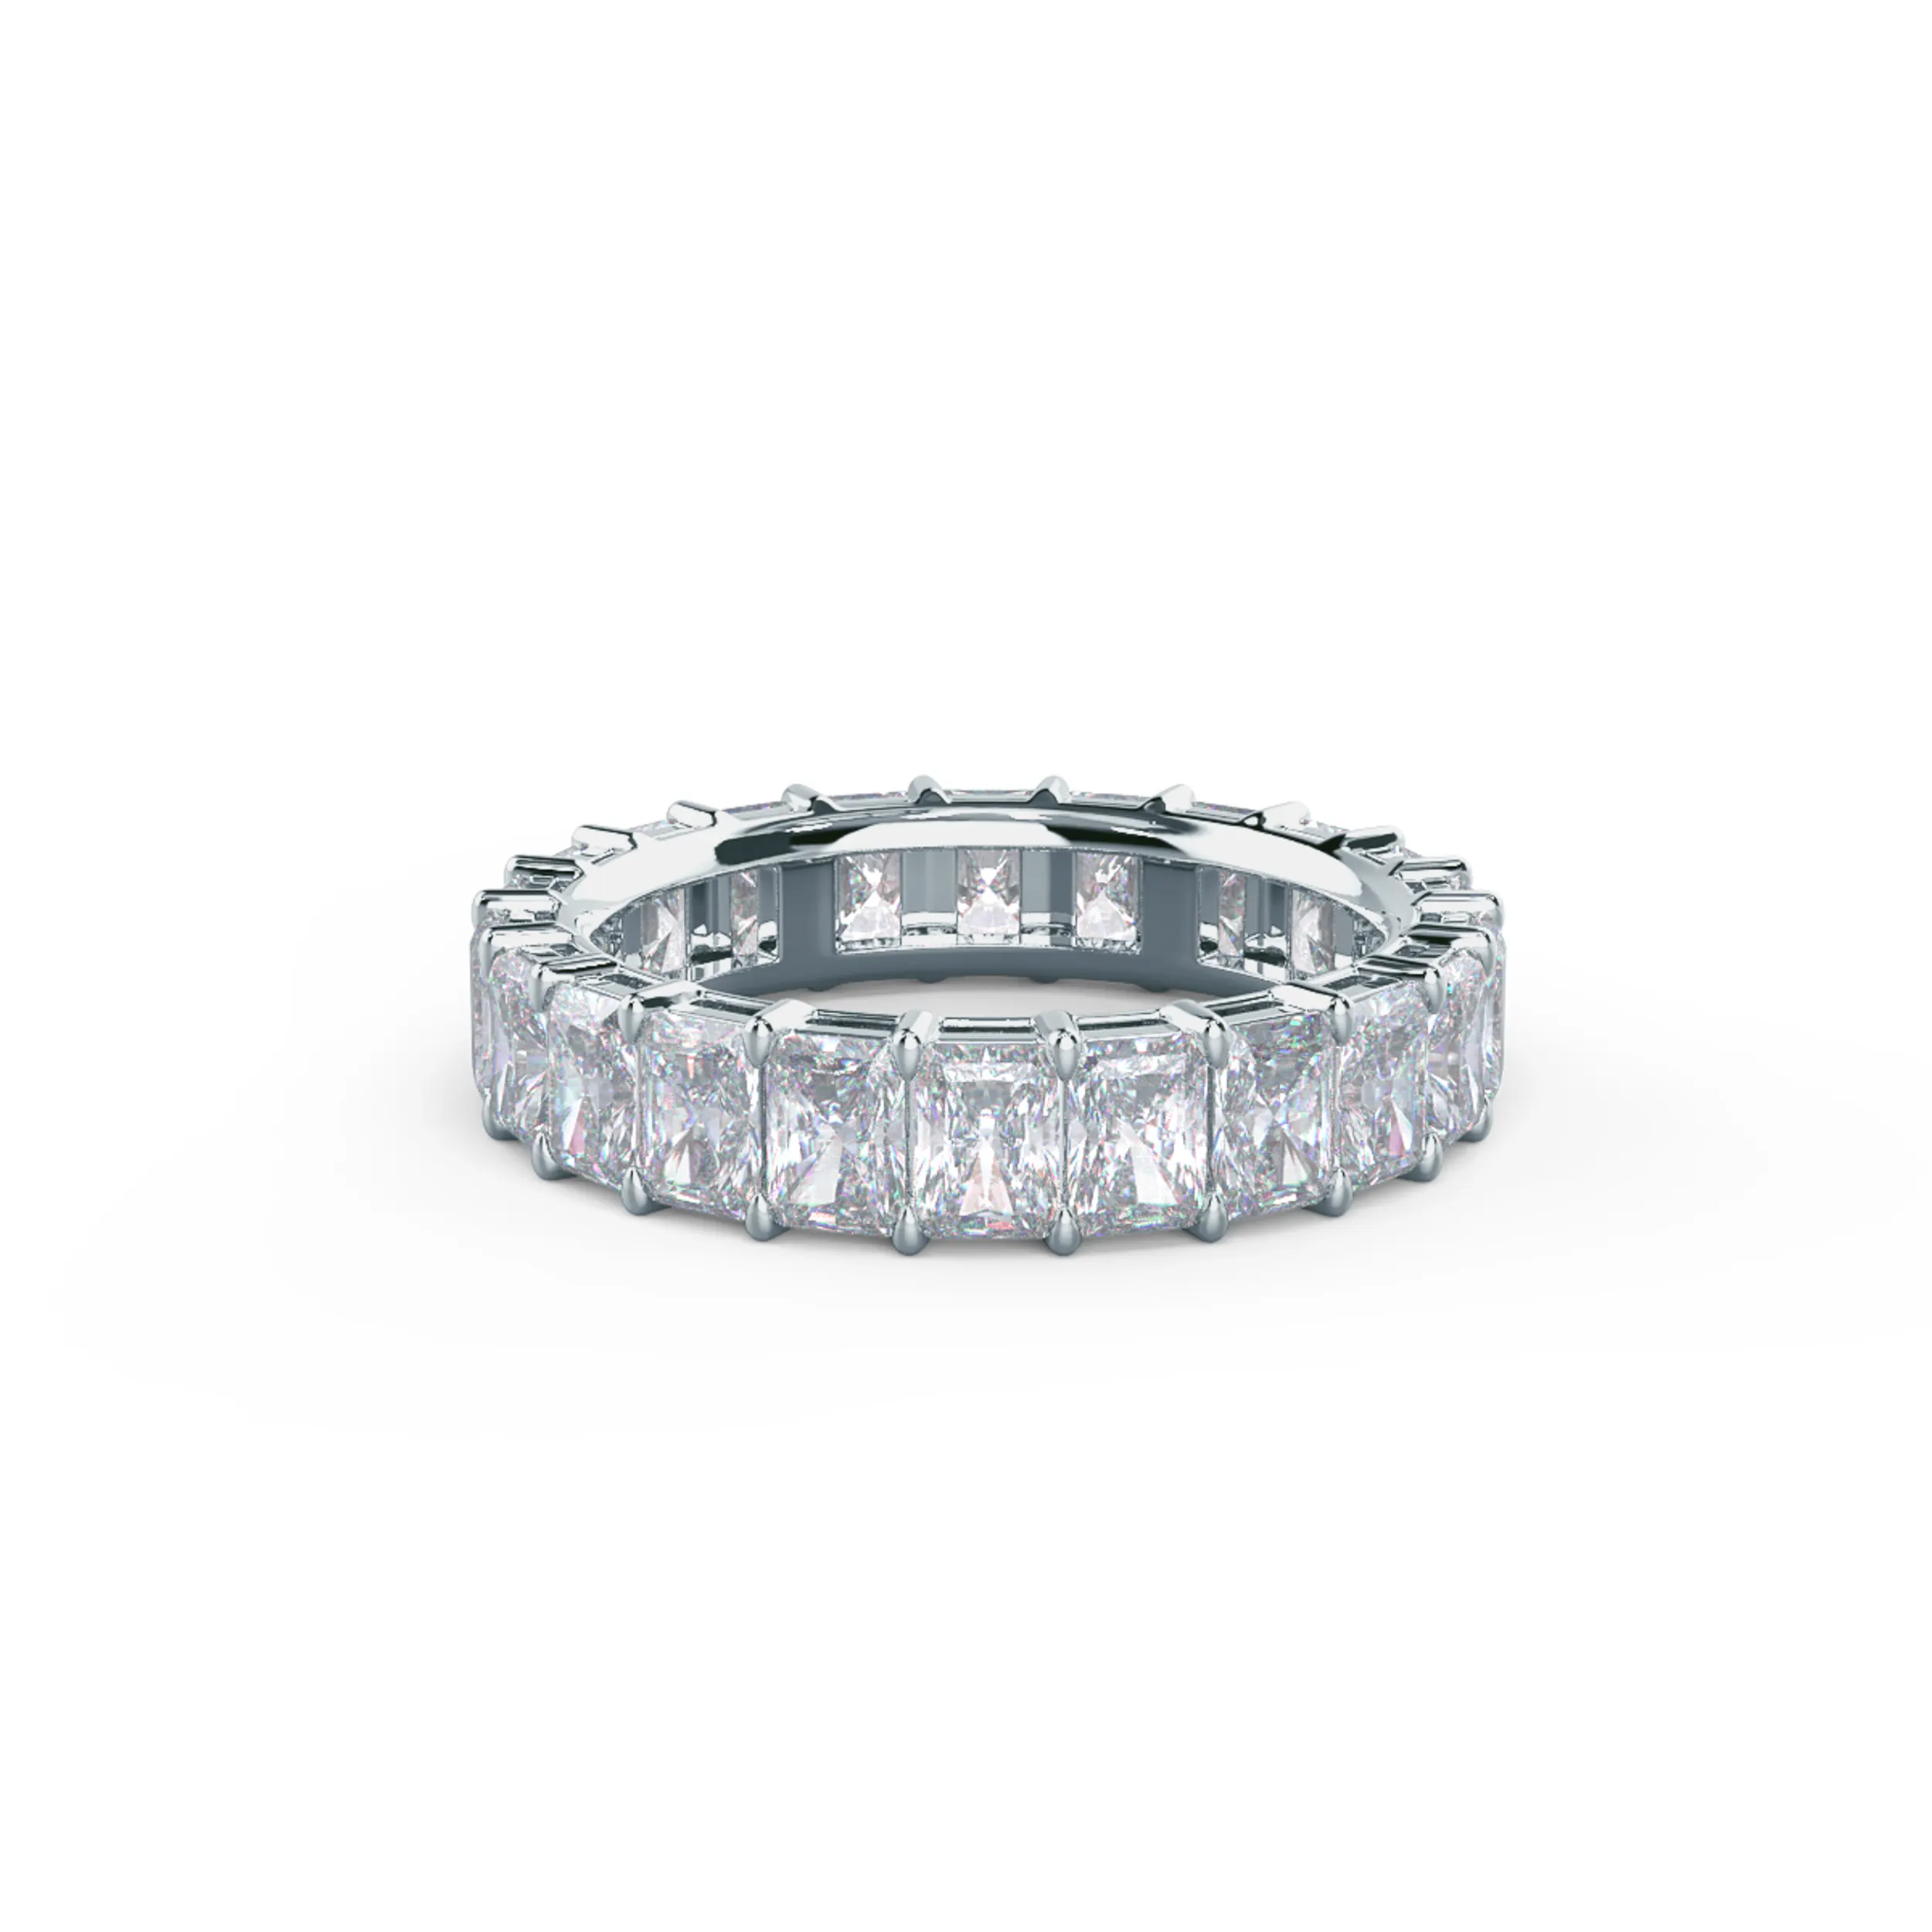 18k White Gold Radiant Eternity Band featuring Hand Selected 4.4 ct Synthetic Diamonds (Main View)